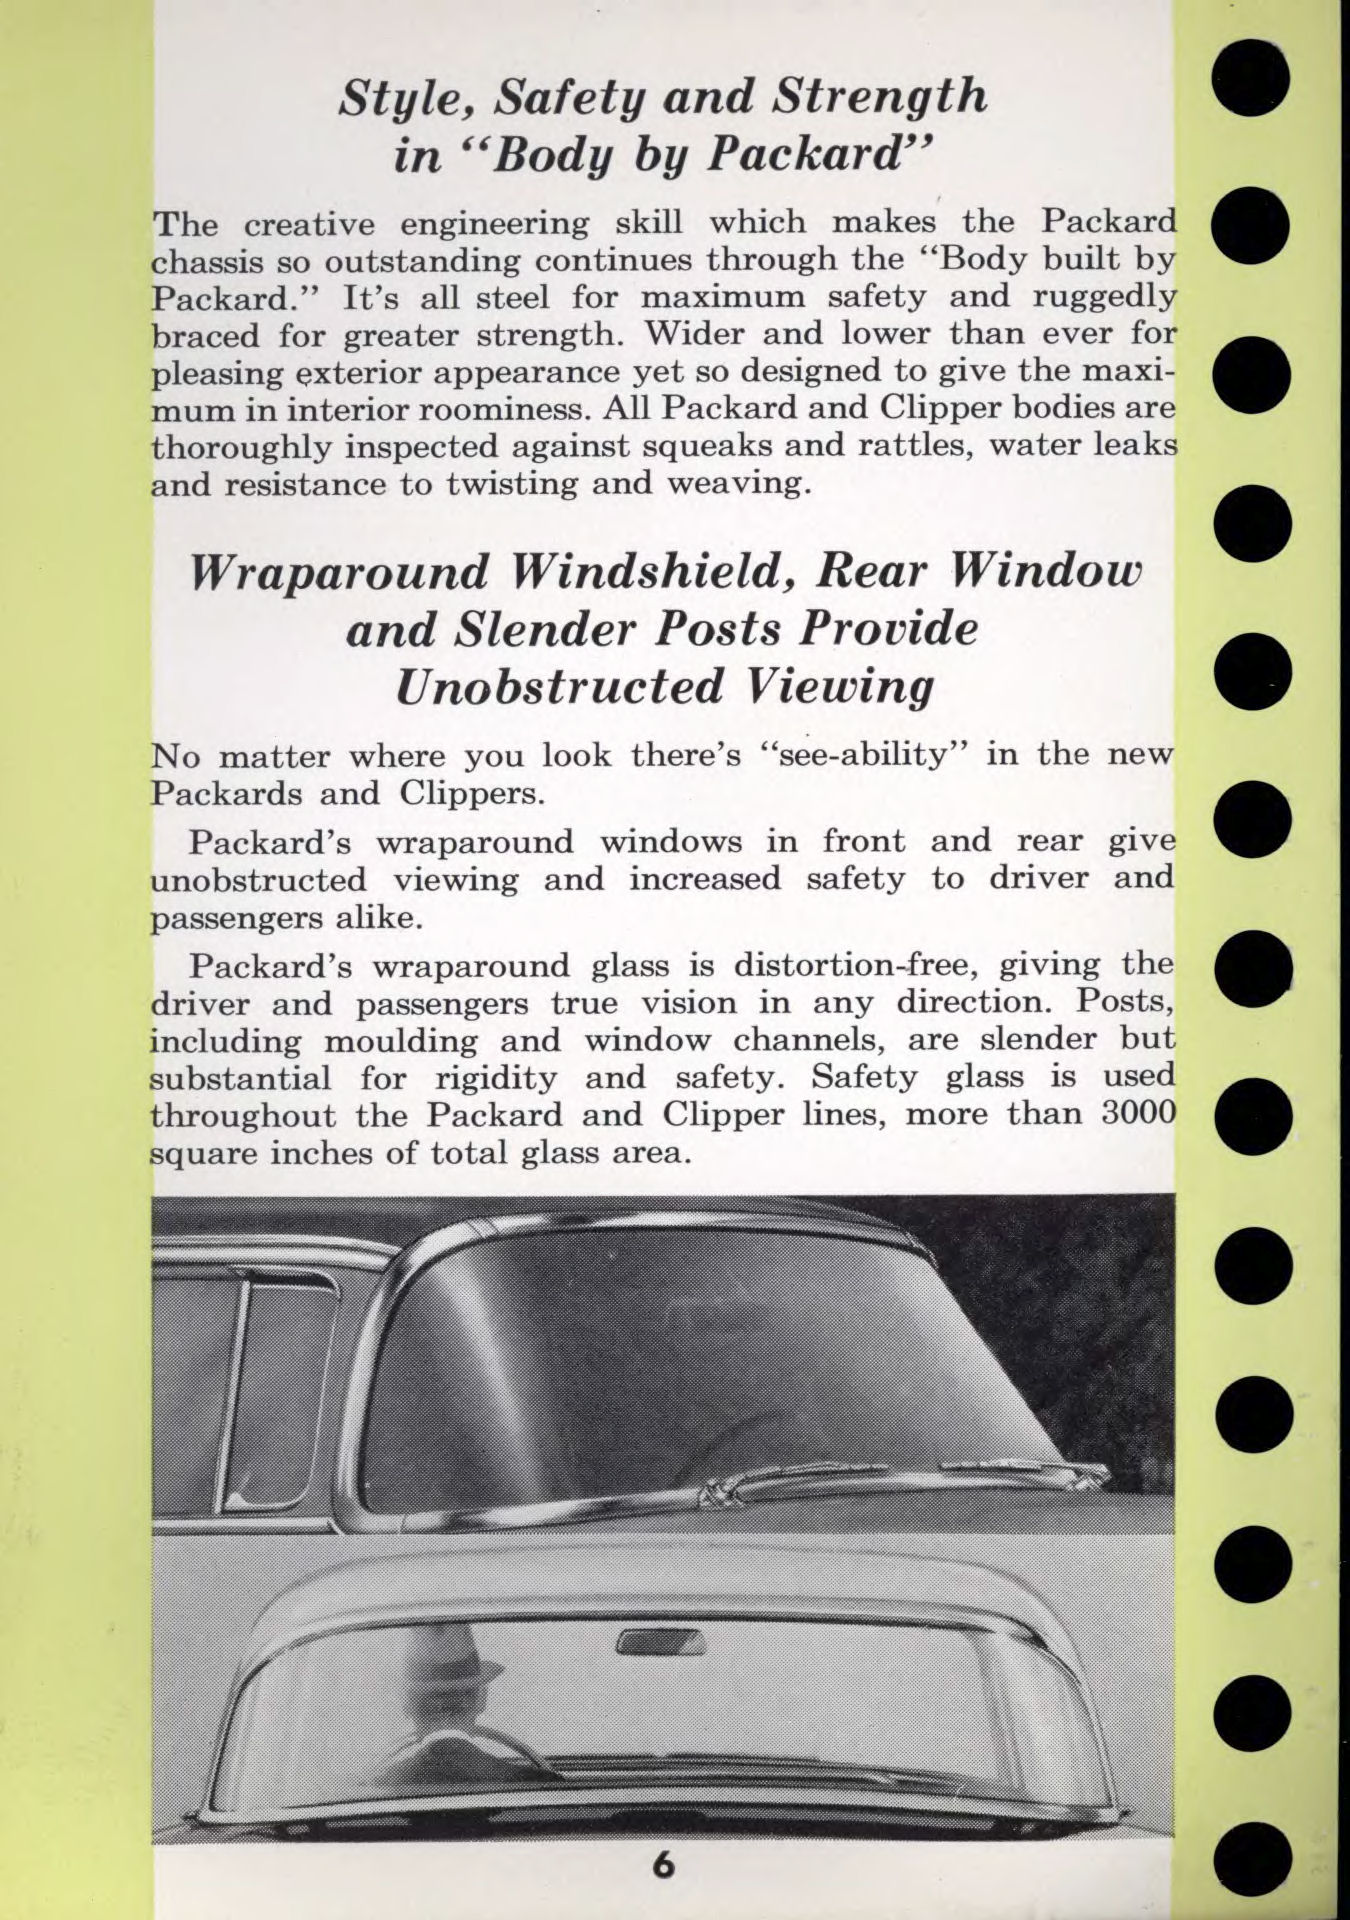 1956 Packard Data Book Page 5